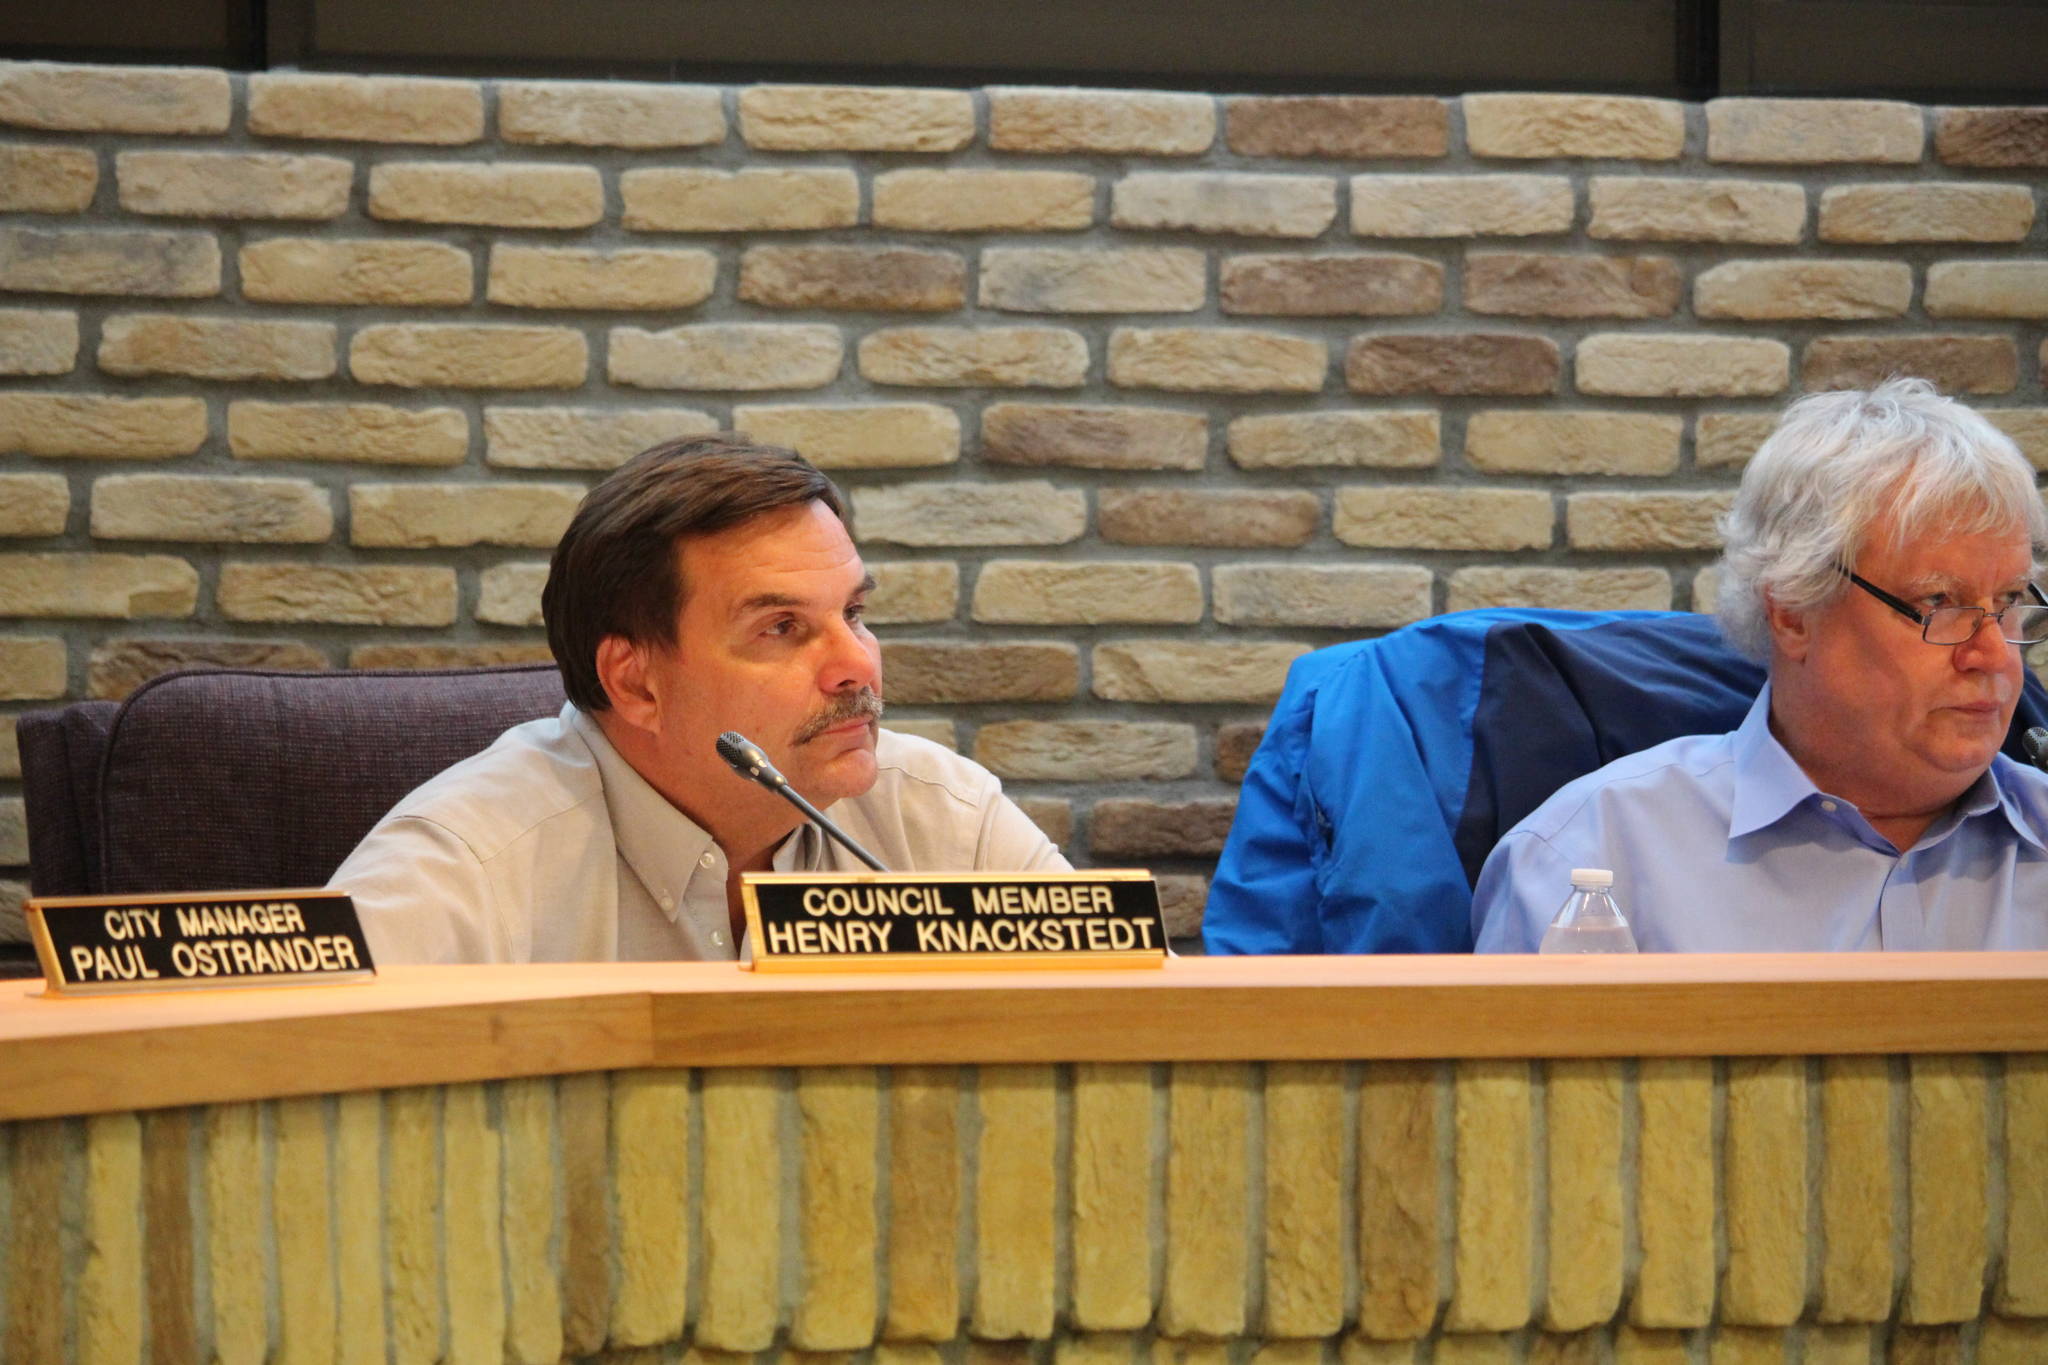 Kenai City Council Members Henry Knackstedt, left, and Bob Molloy, right, listen to public comments during the Kenai City Council Meeting on Wednesday, Sept. 18, 2019. (Photo by Brian Mazurek/Peninsula Clarion)